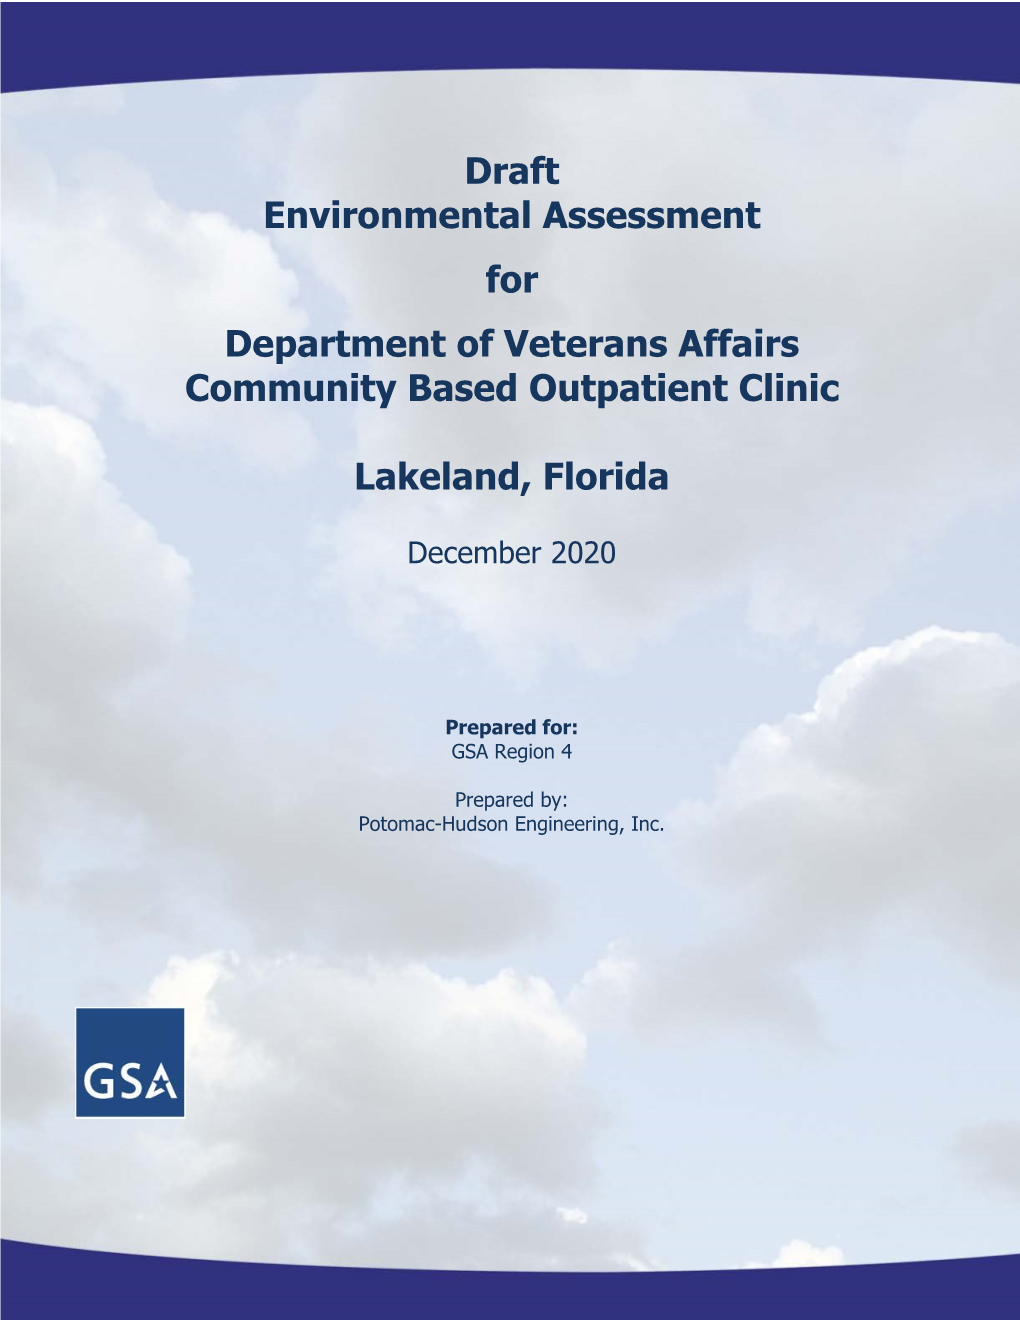 Draft Environmental Assessment for Department of Veterans Affairs Community Based Outpatient Clinic